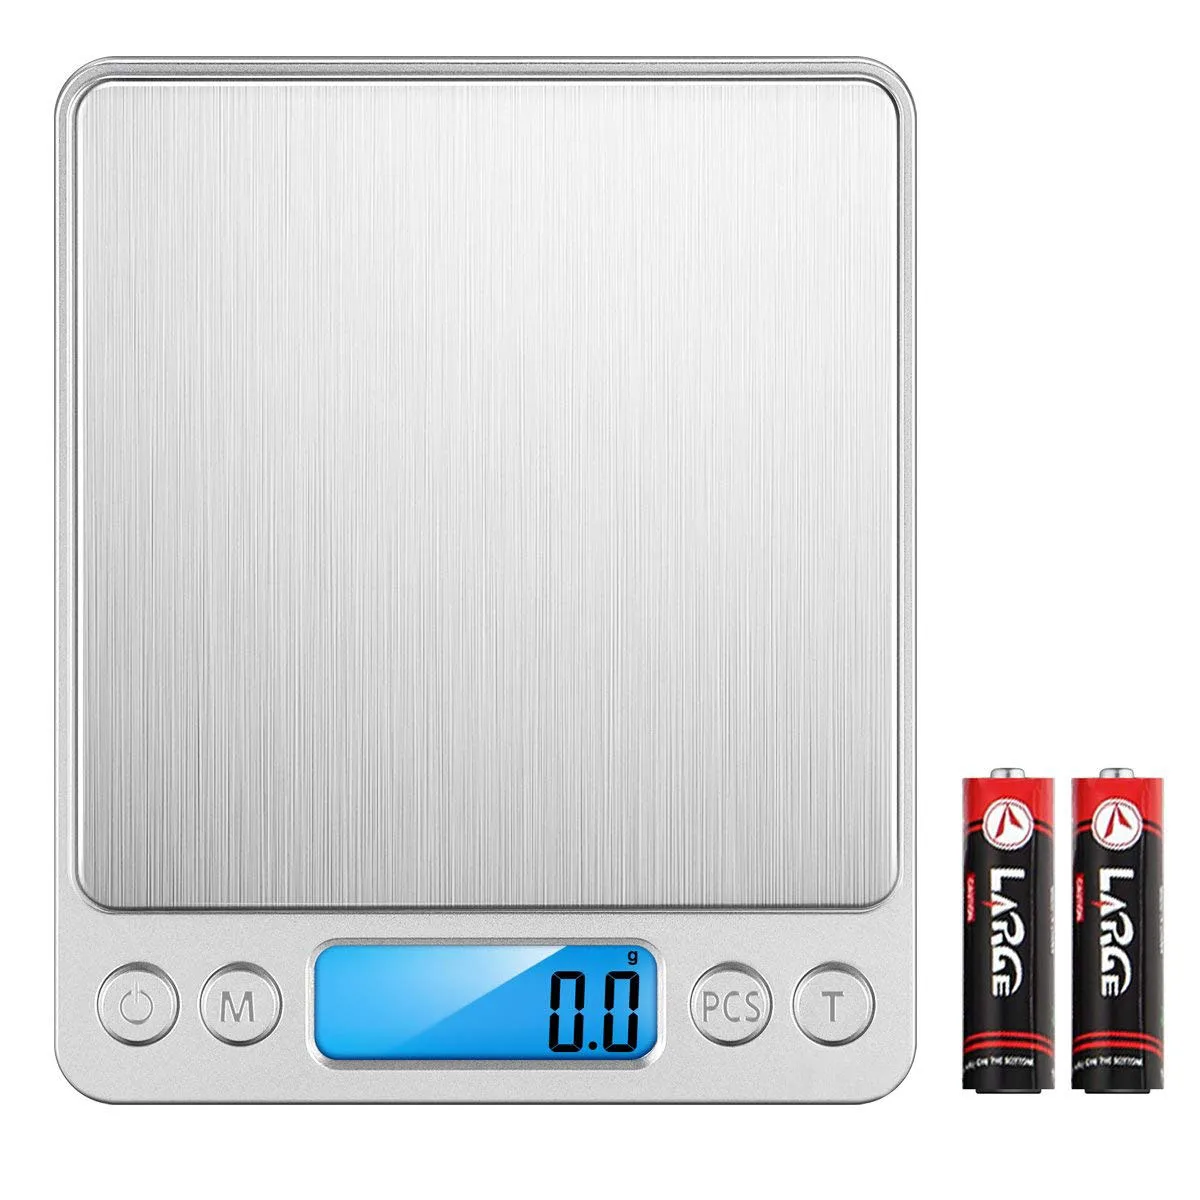 Portable And Highly-Accurate cute kitchen scale 